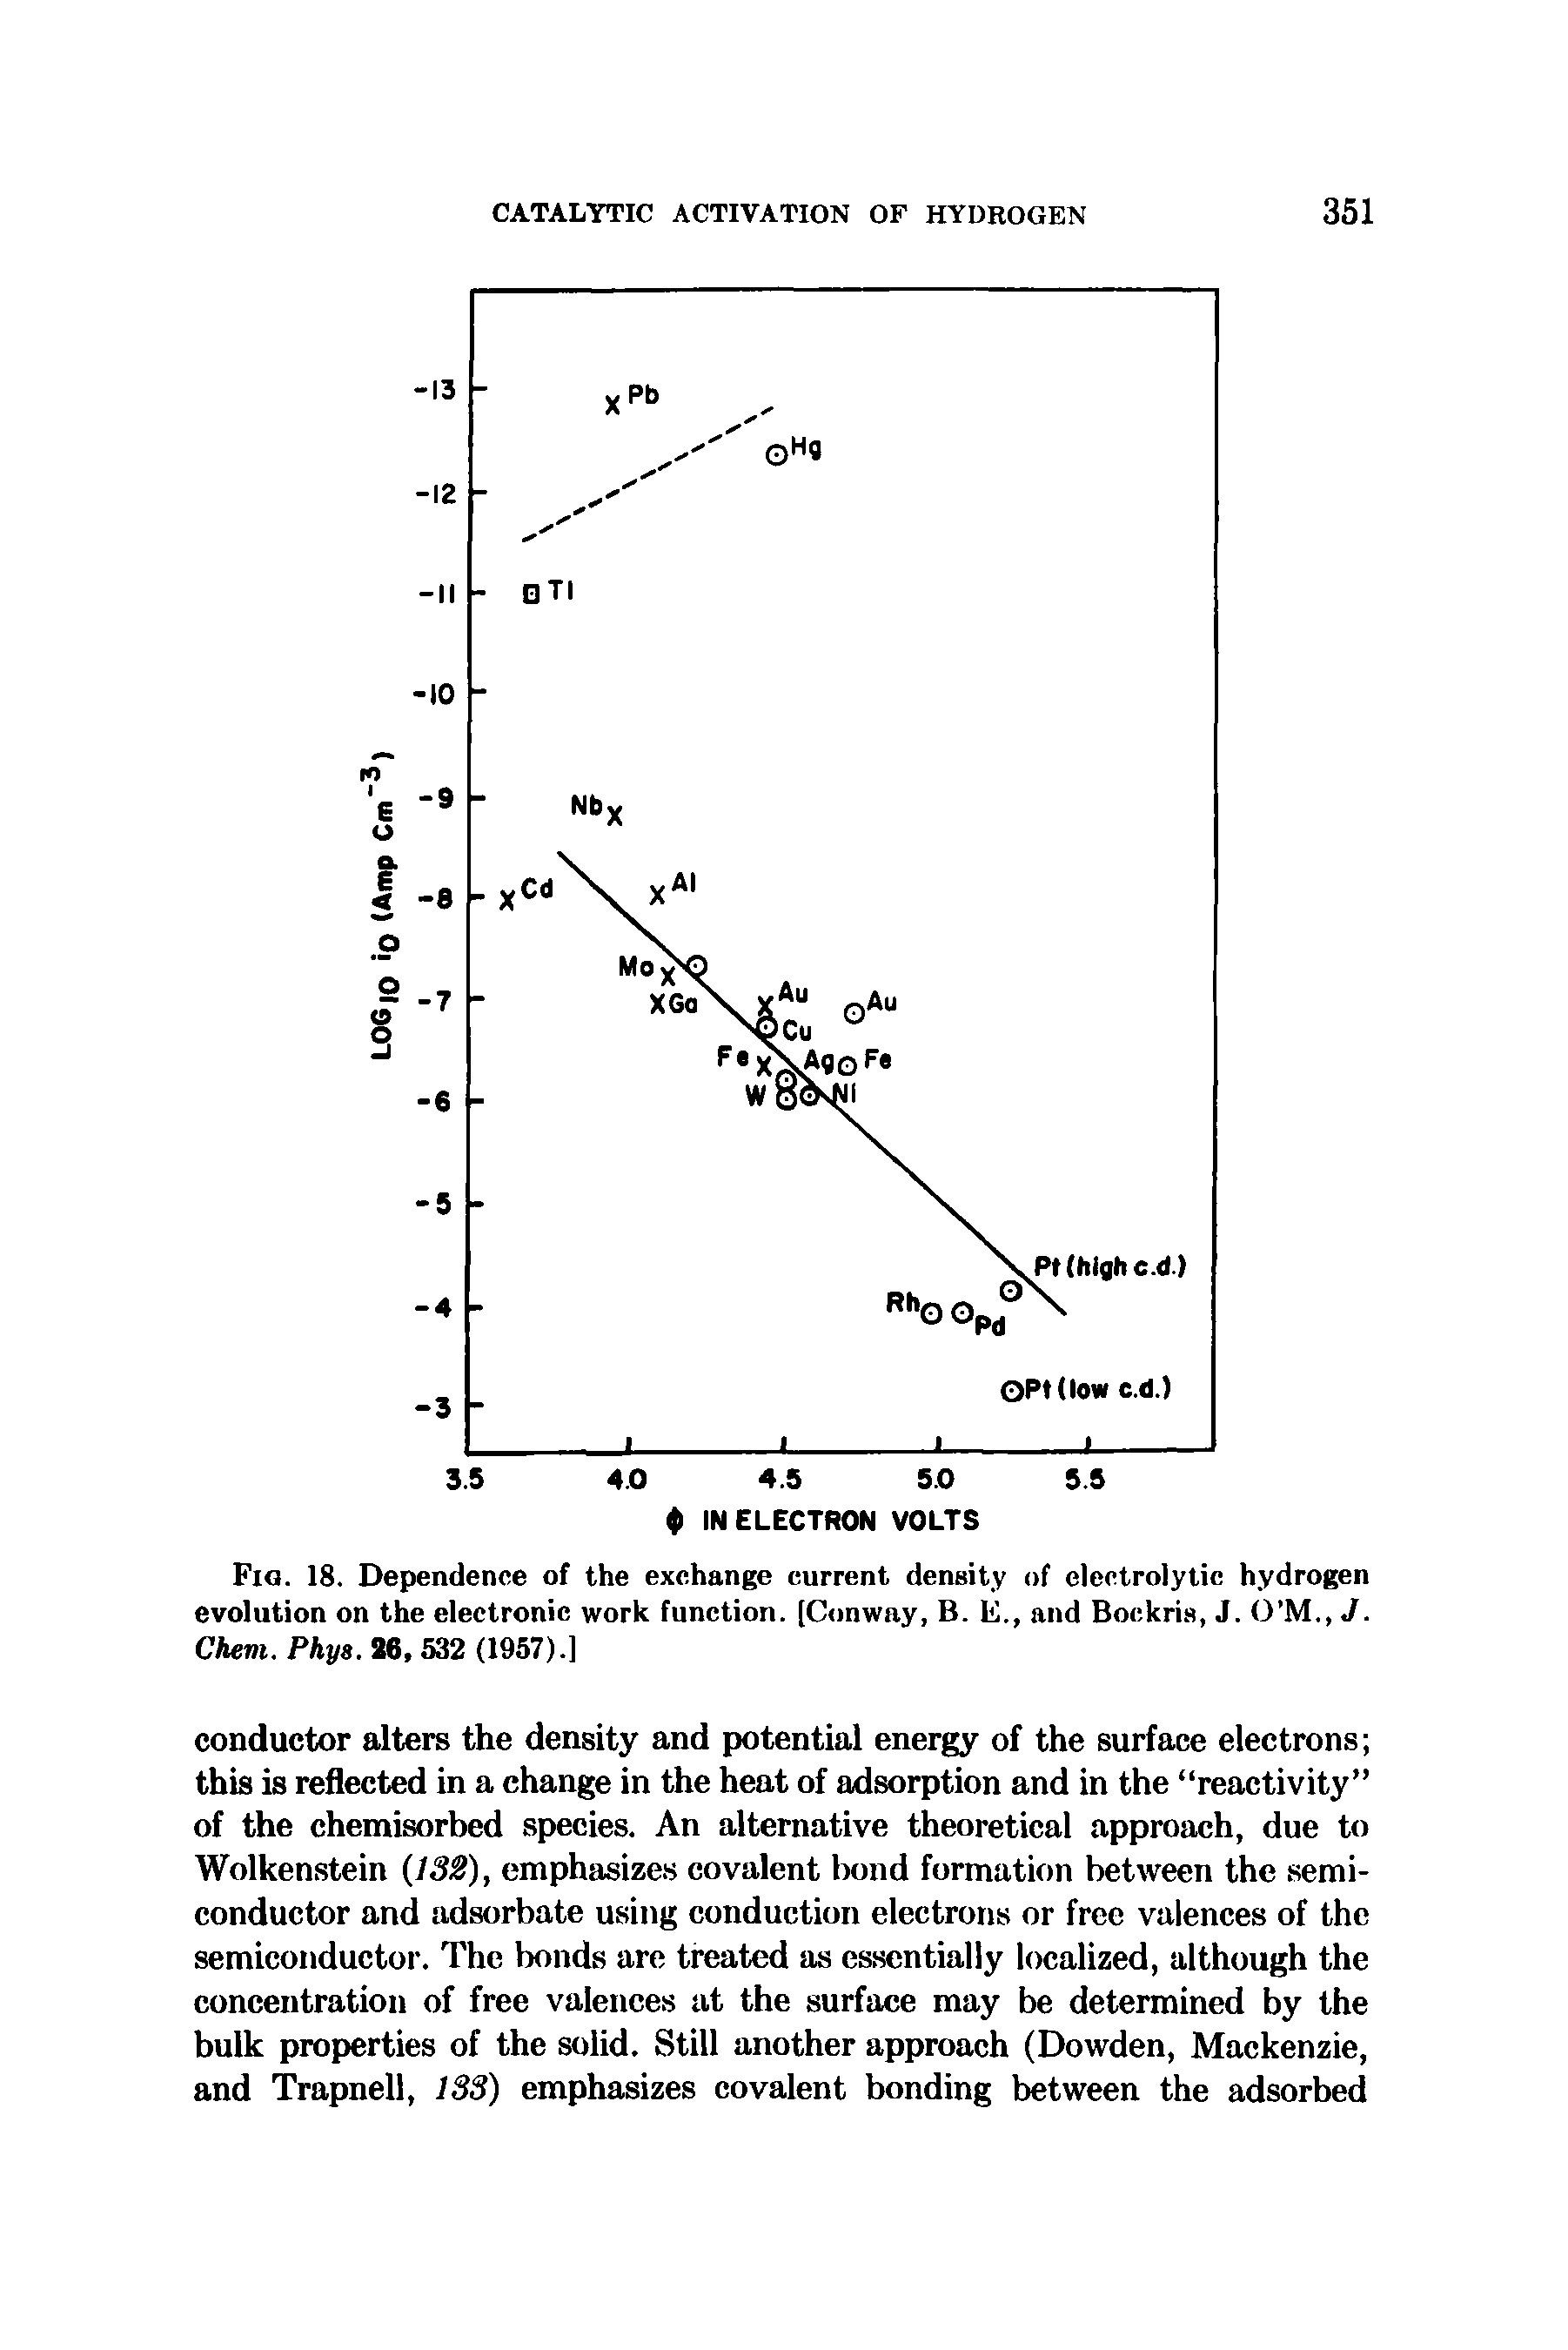 Fig. 18. Dependence of the exchange current density of electrolytic hydrogen evolution on the electronic work function. [C<mway, B. E., and Bockris, J. O M., J. Chevt. Phys. 26. 532 (1957).]...